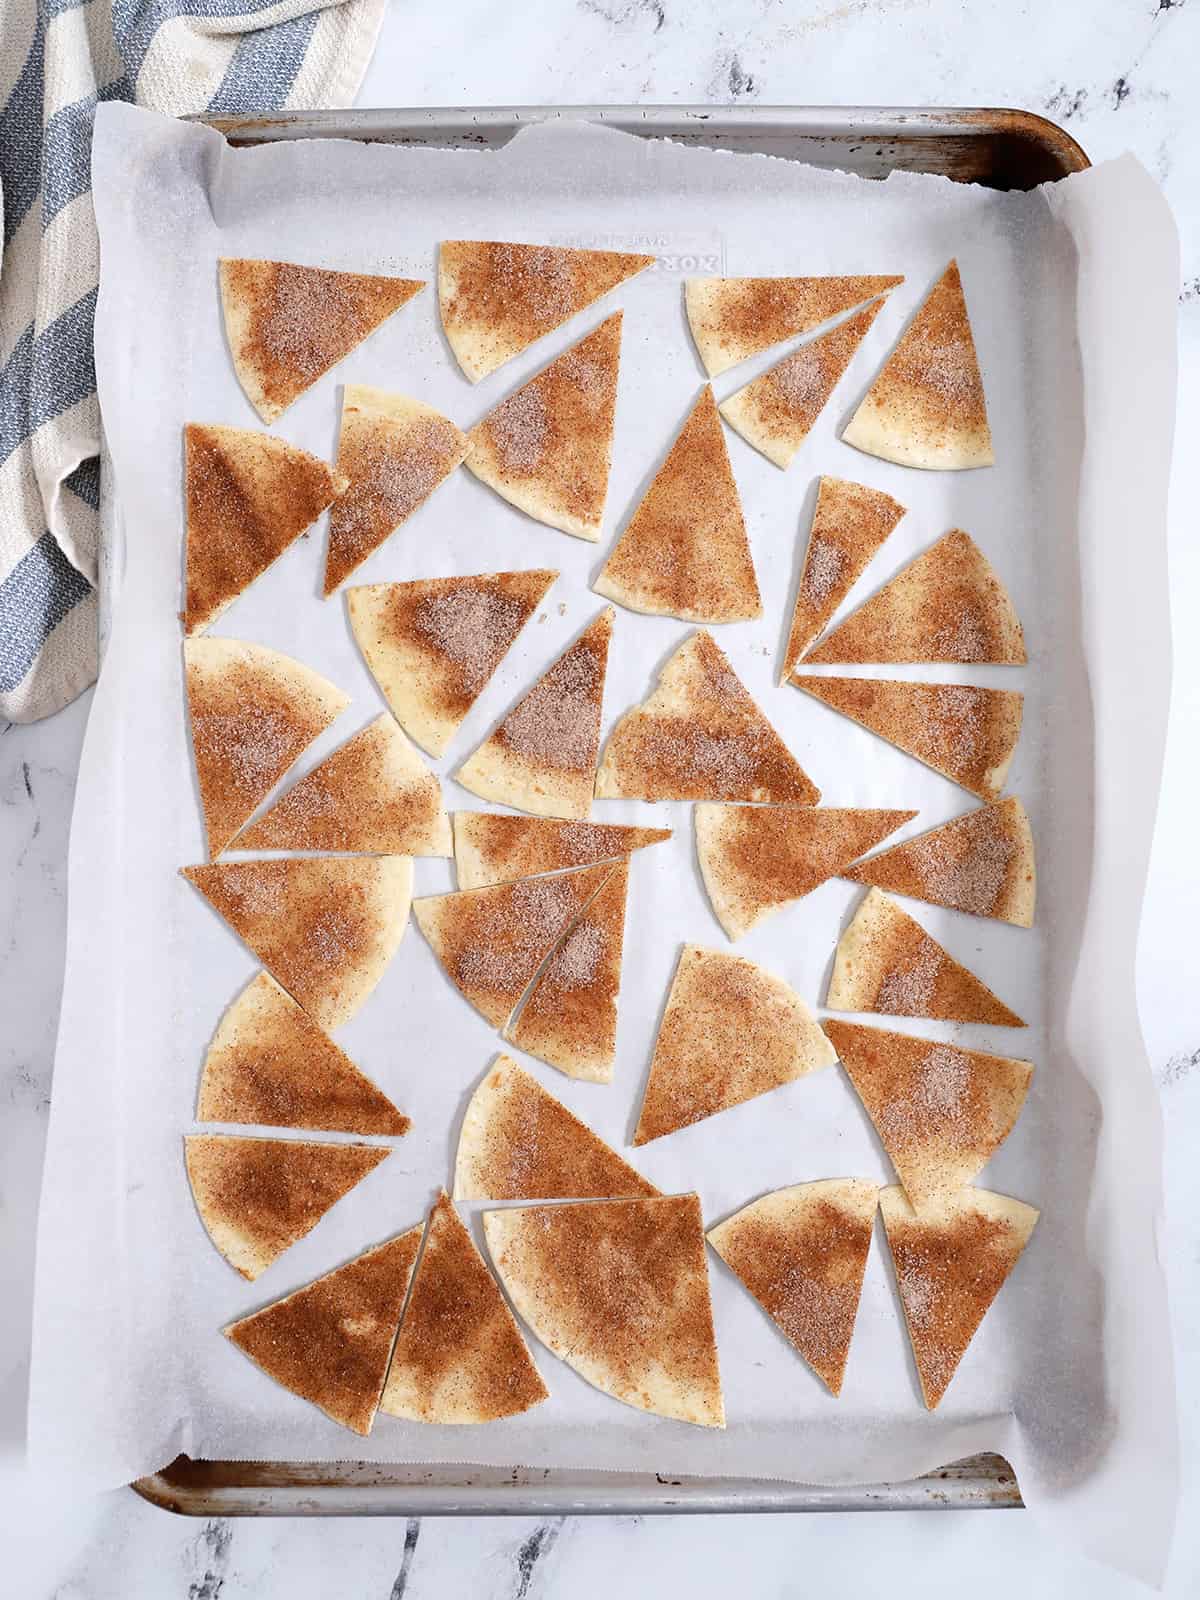 A sheet pan covered with parchment paper and triangles of cinnamon sugar tortillas, ready for the oven.